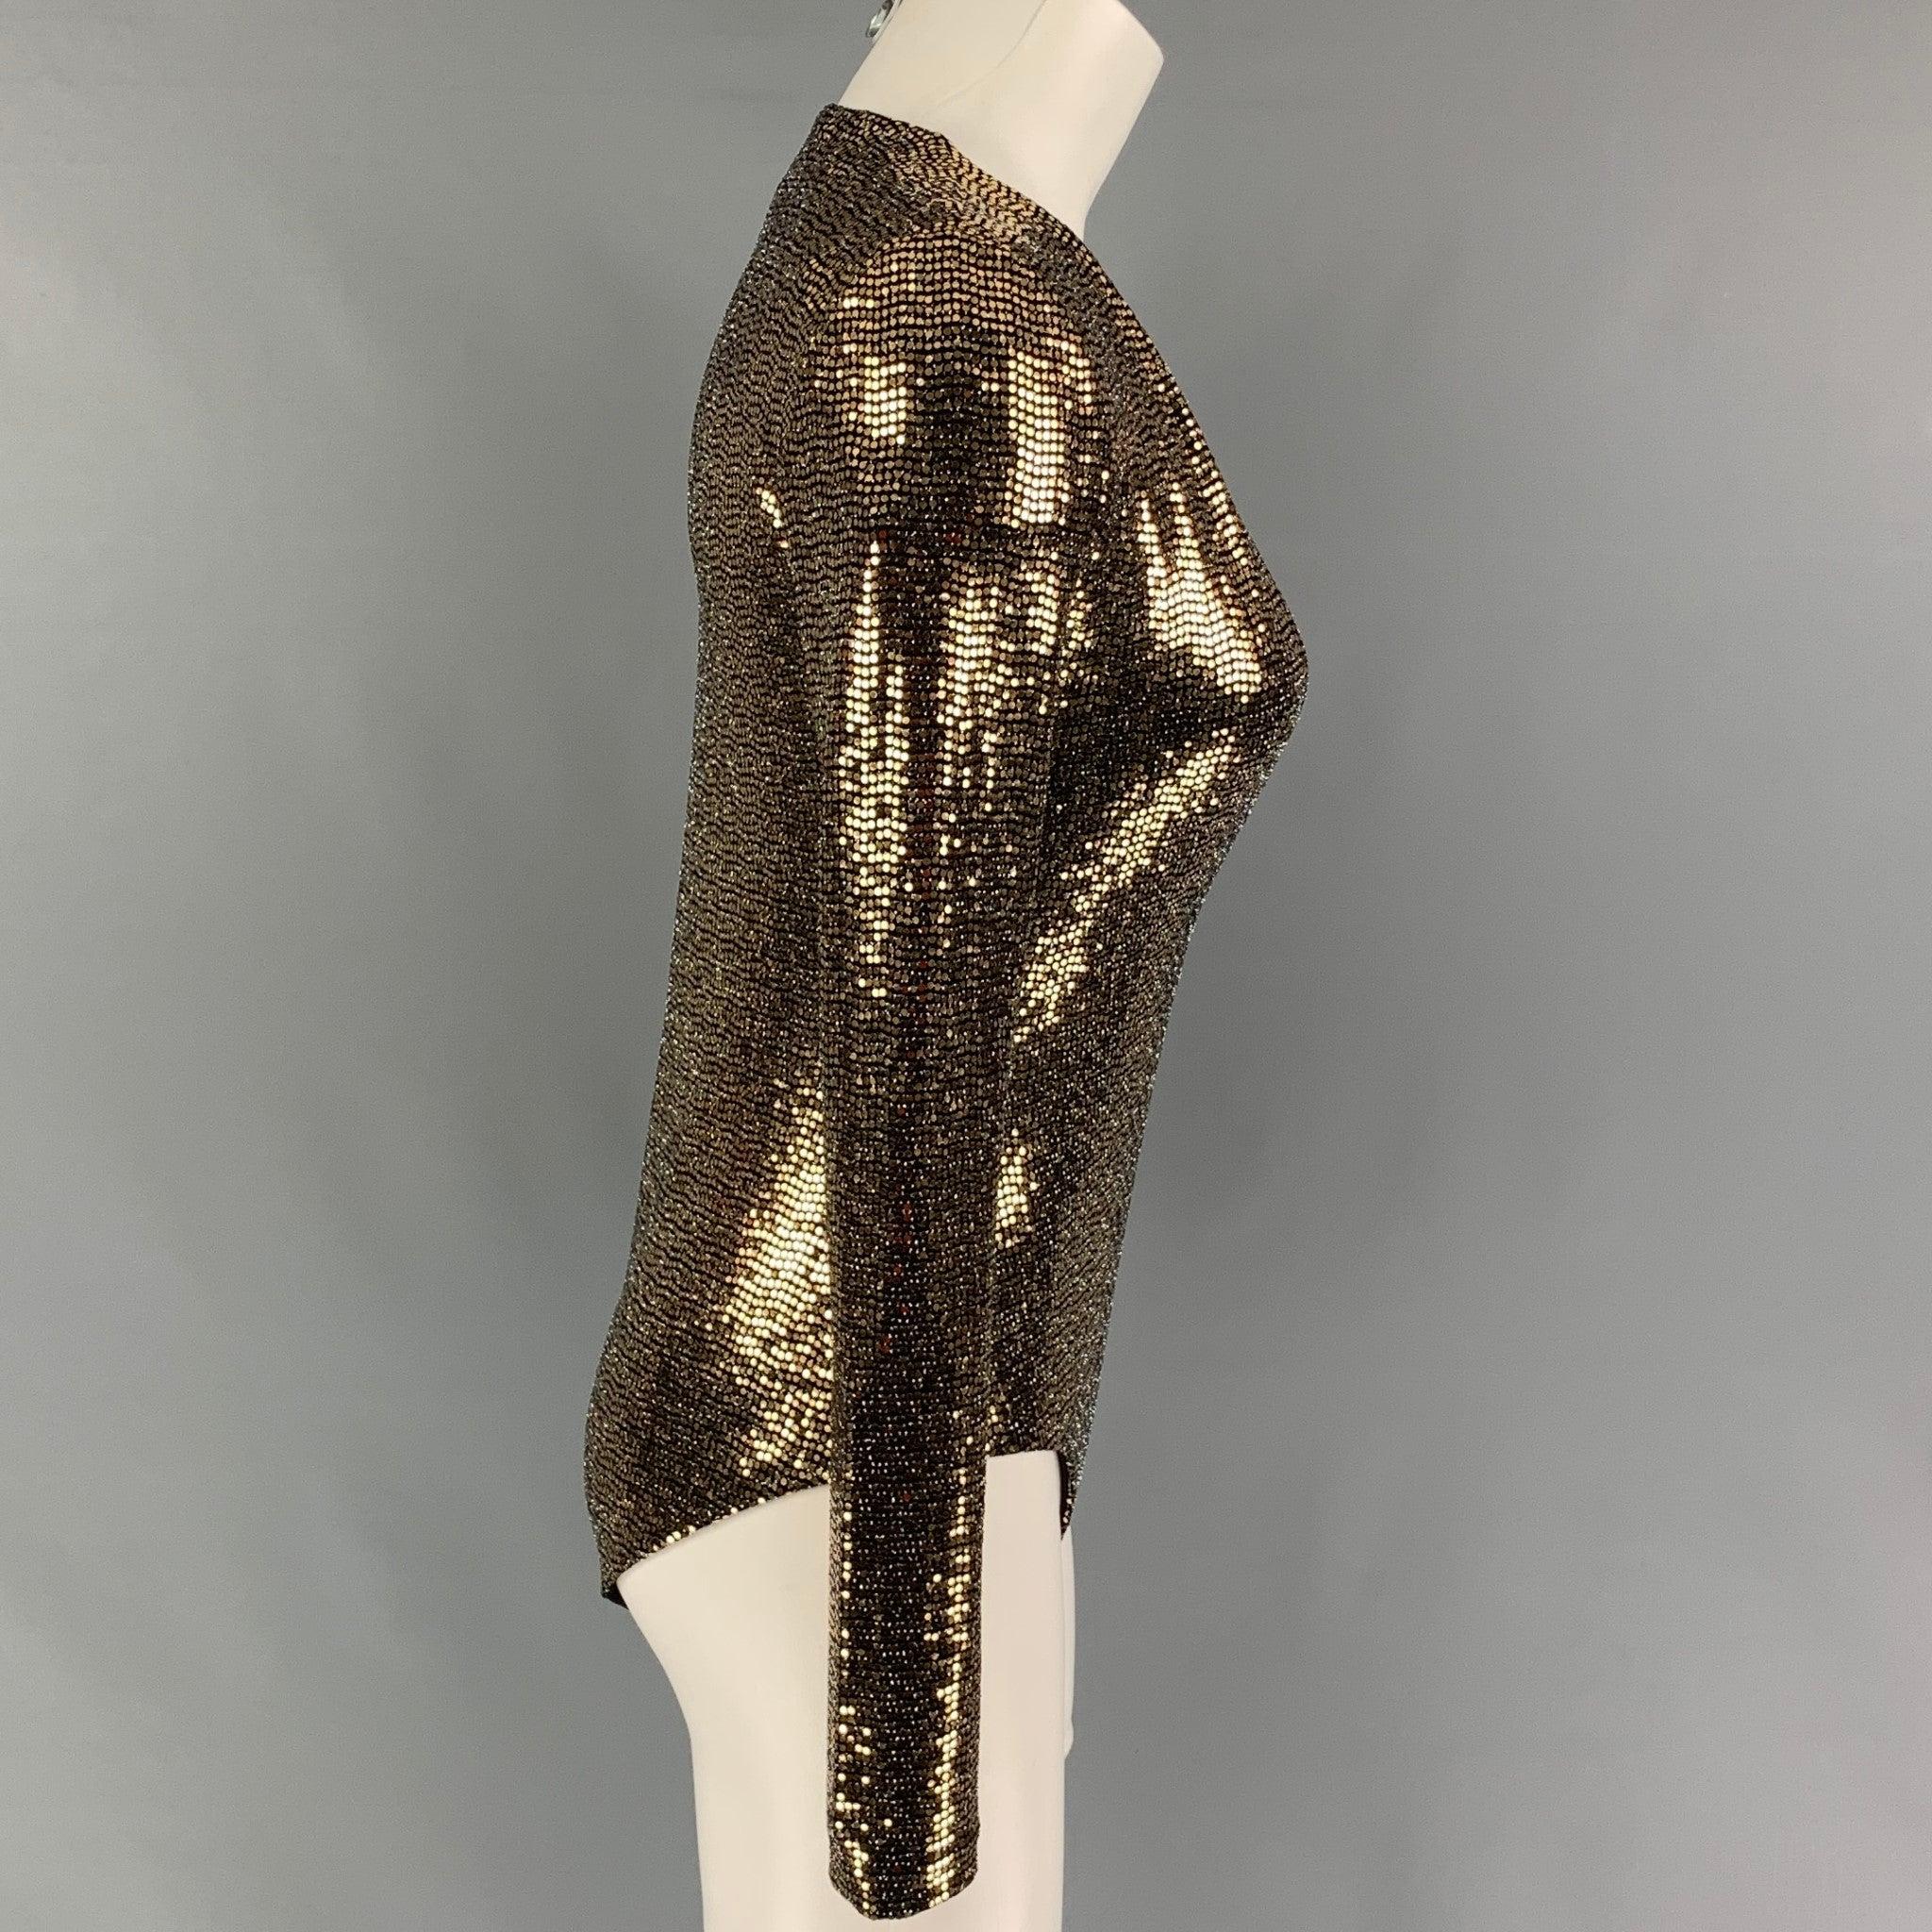 GUCCI body suit top comes in a gold & black metallic polyamide blend featuring a v-neck, long sleeve, and a snap button closure.
New With Tags.
 

Marked:   S 

Measurements: 
 
Shoulder:
14 inches Bust: 30 inches  Sleeve: 25.5 inches  Length: 26.5